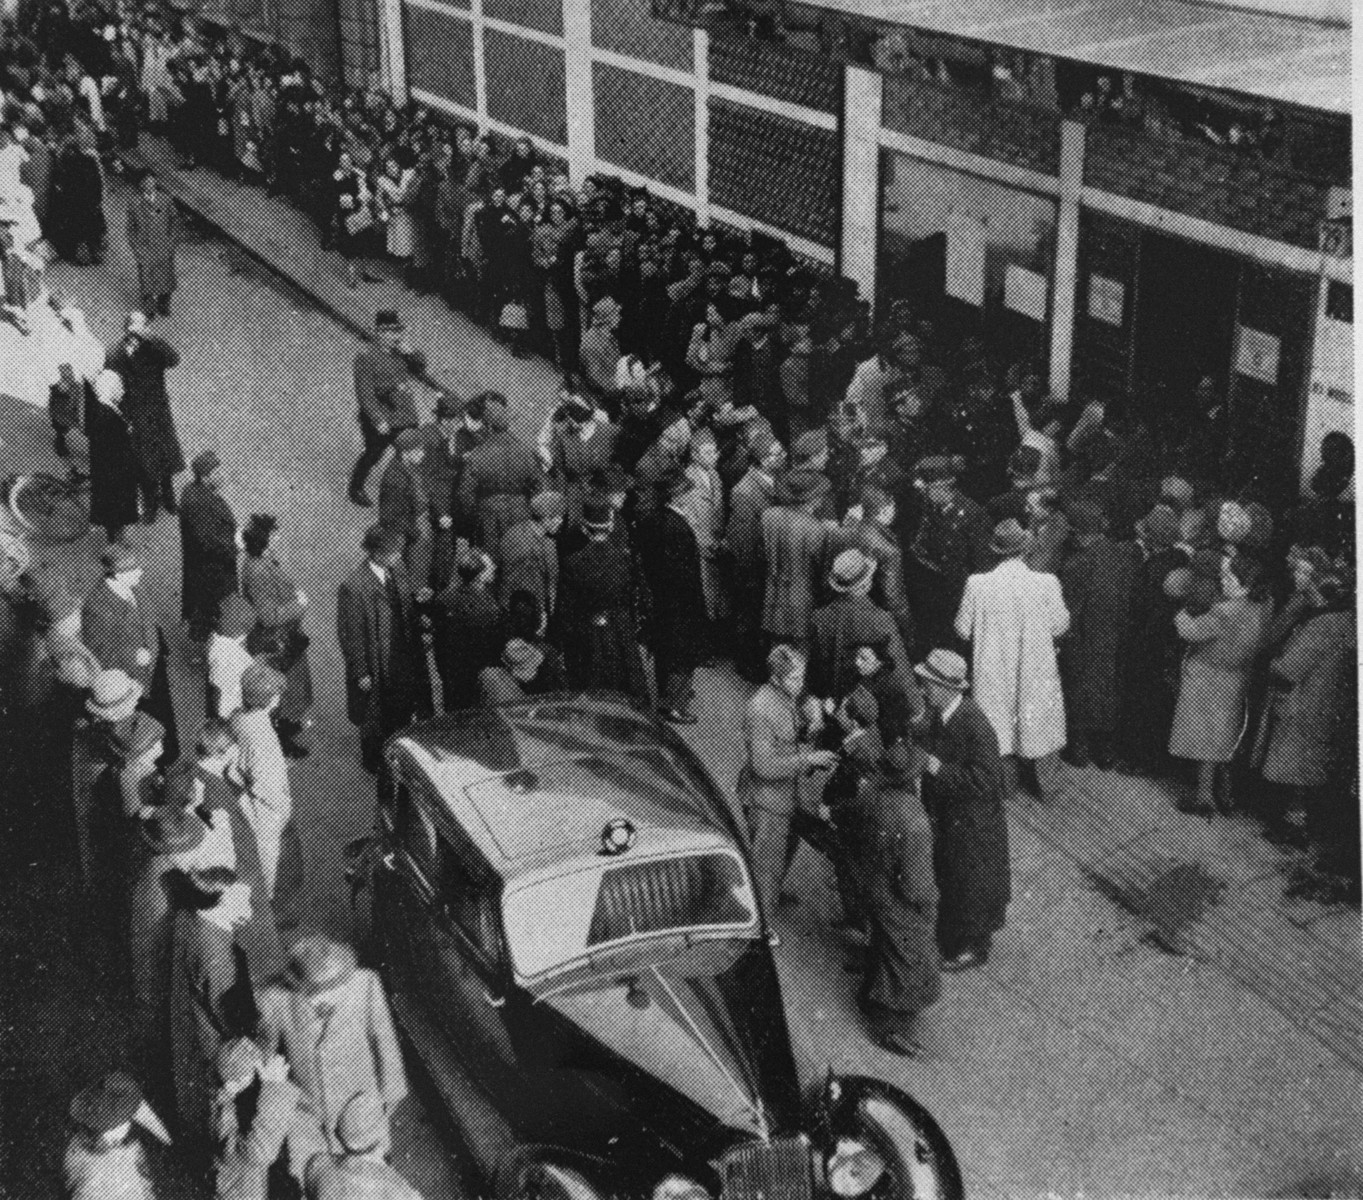 Police attempt to control the crowd of Jews, who are waiting outside a branch of the Swiss legation located in the Glass House on Vadasz Street hoping to obtain Schutzbriefe that would protect them from deportation.

In the foreground is the car used by Vice Consul Carl Lutz.